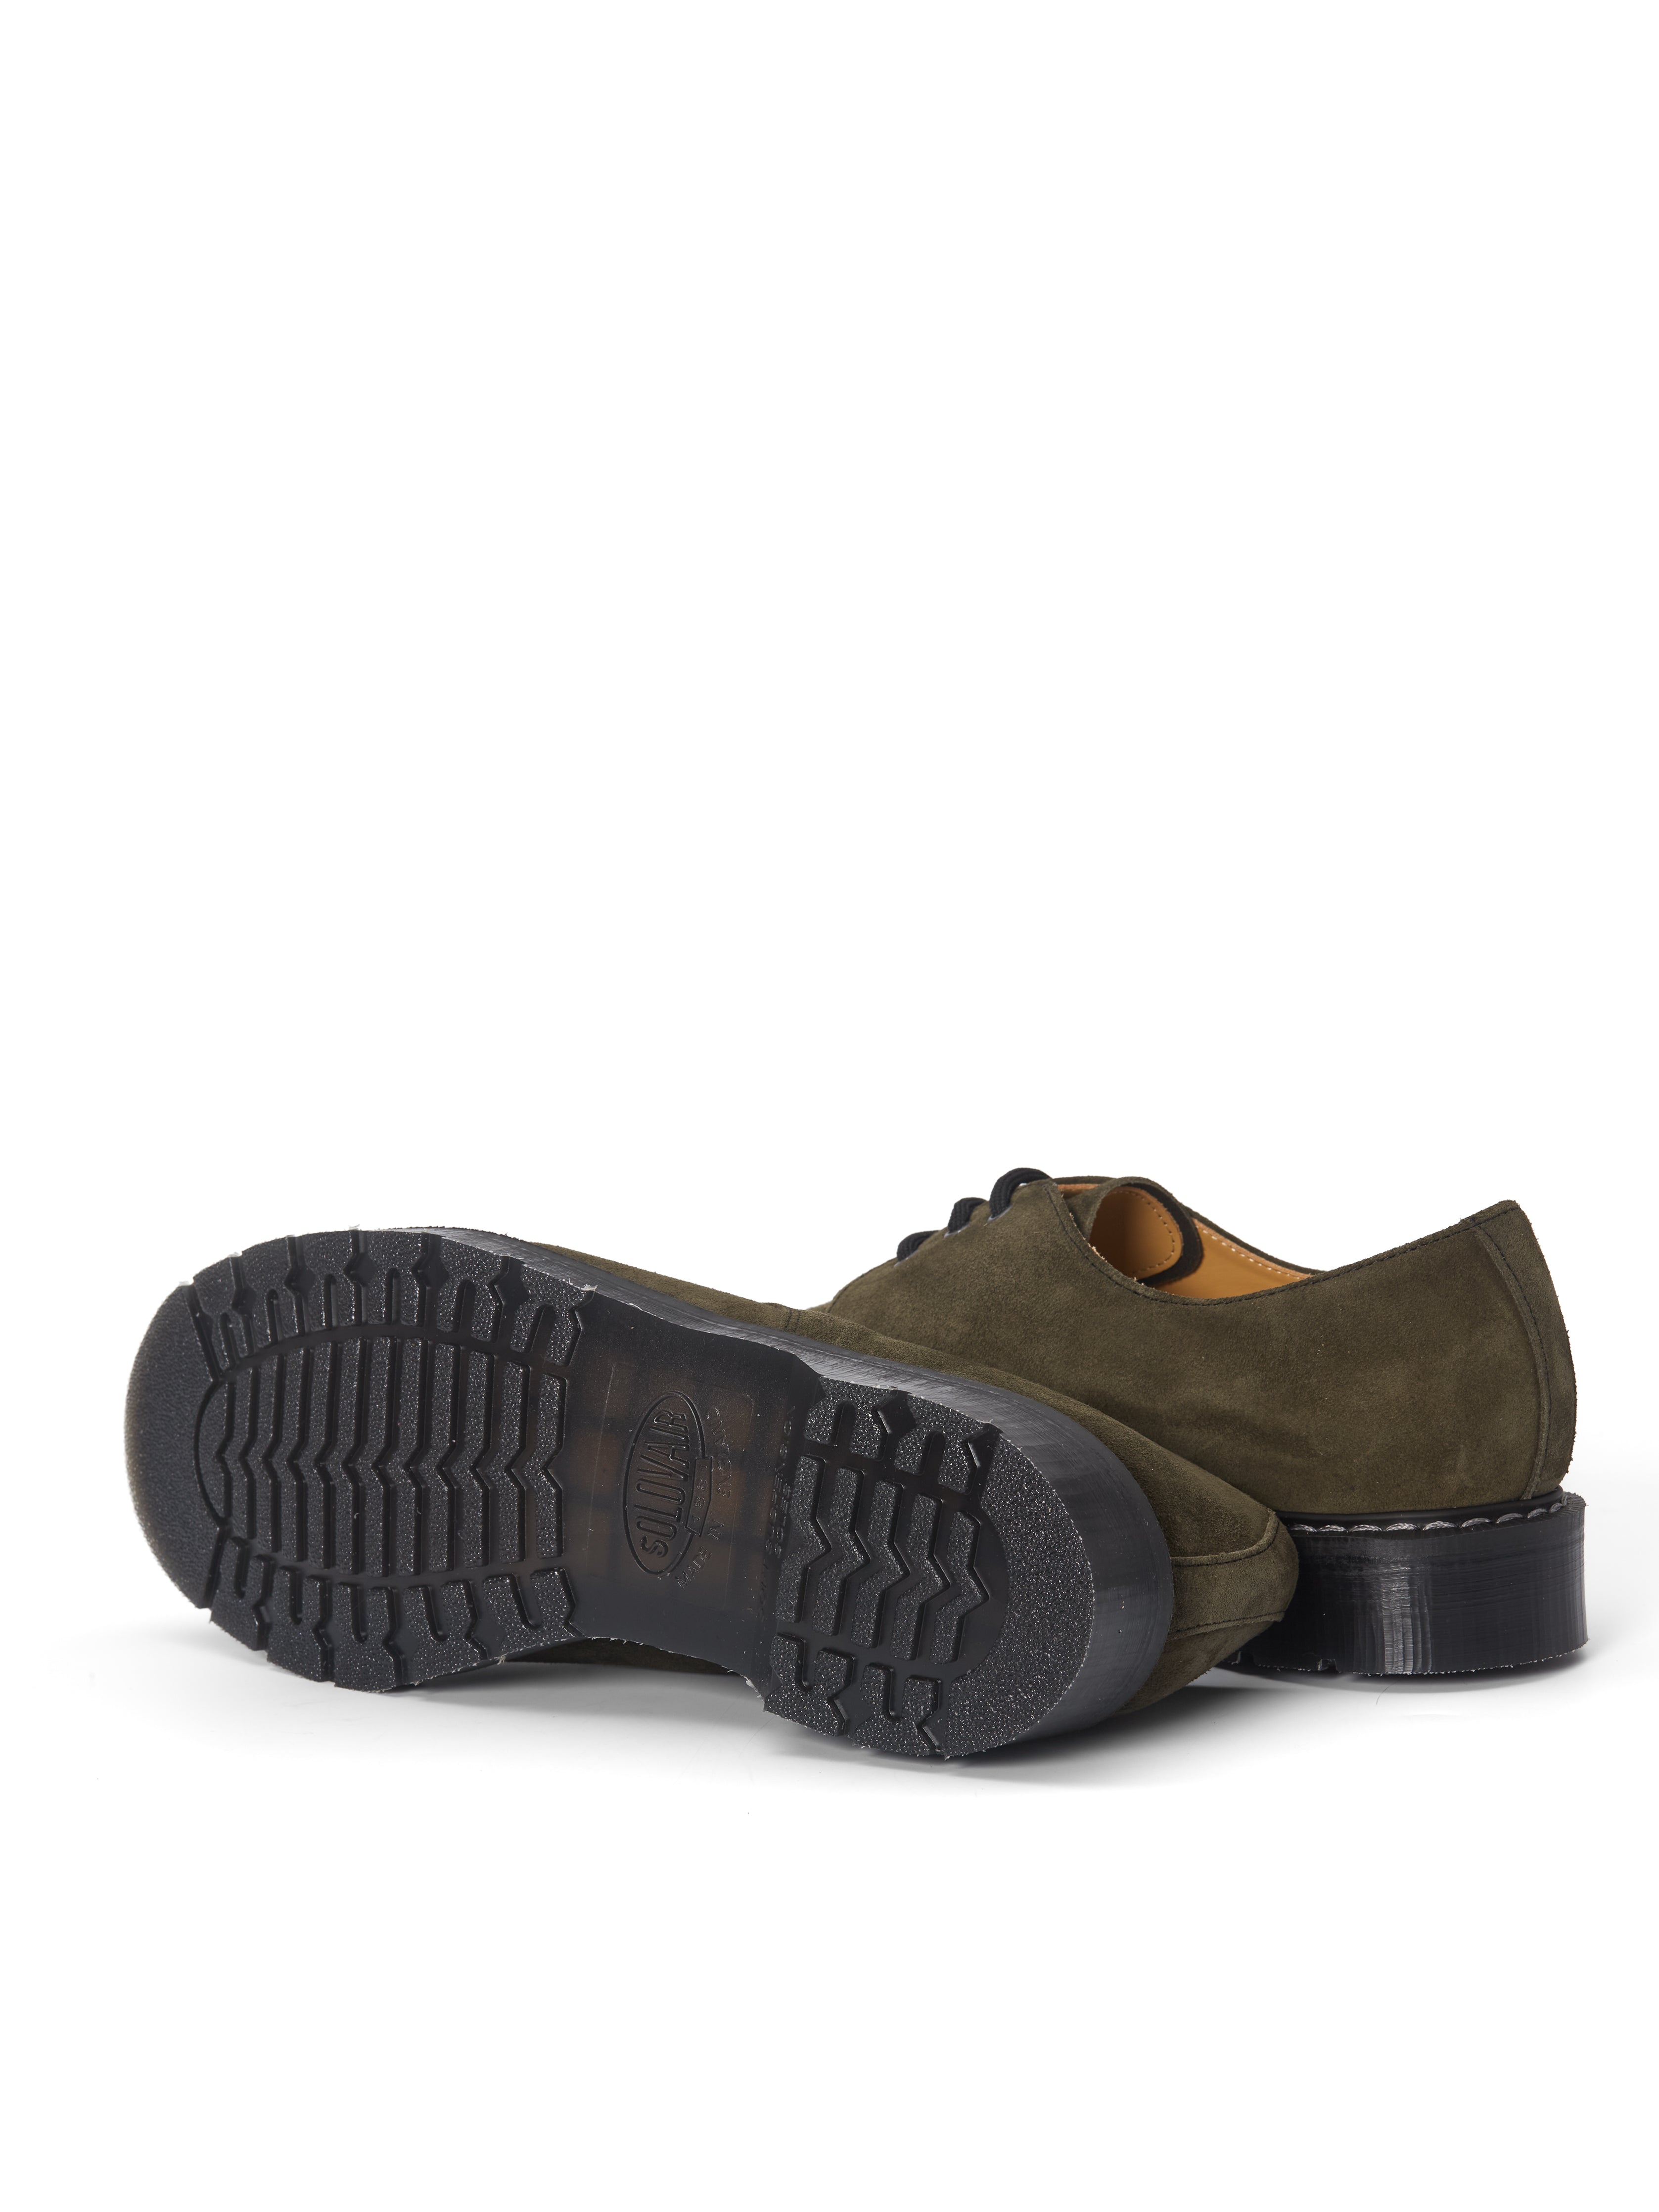 Solovair x Oliver Spencer Green Suede 3-eye Gibson Shoes